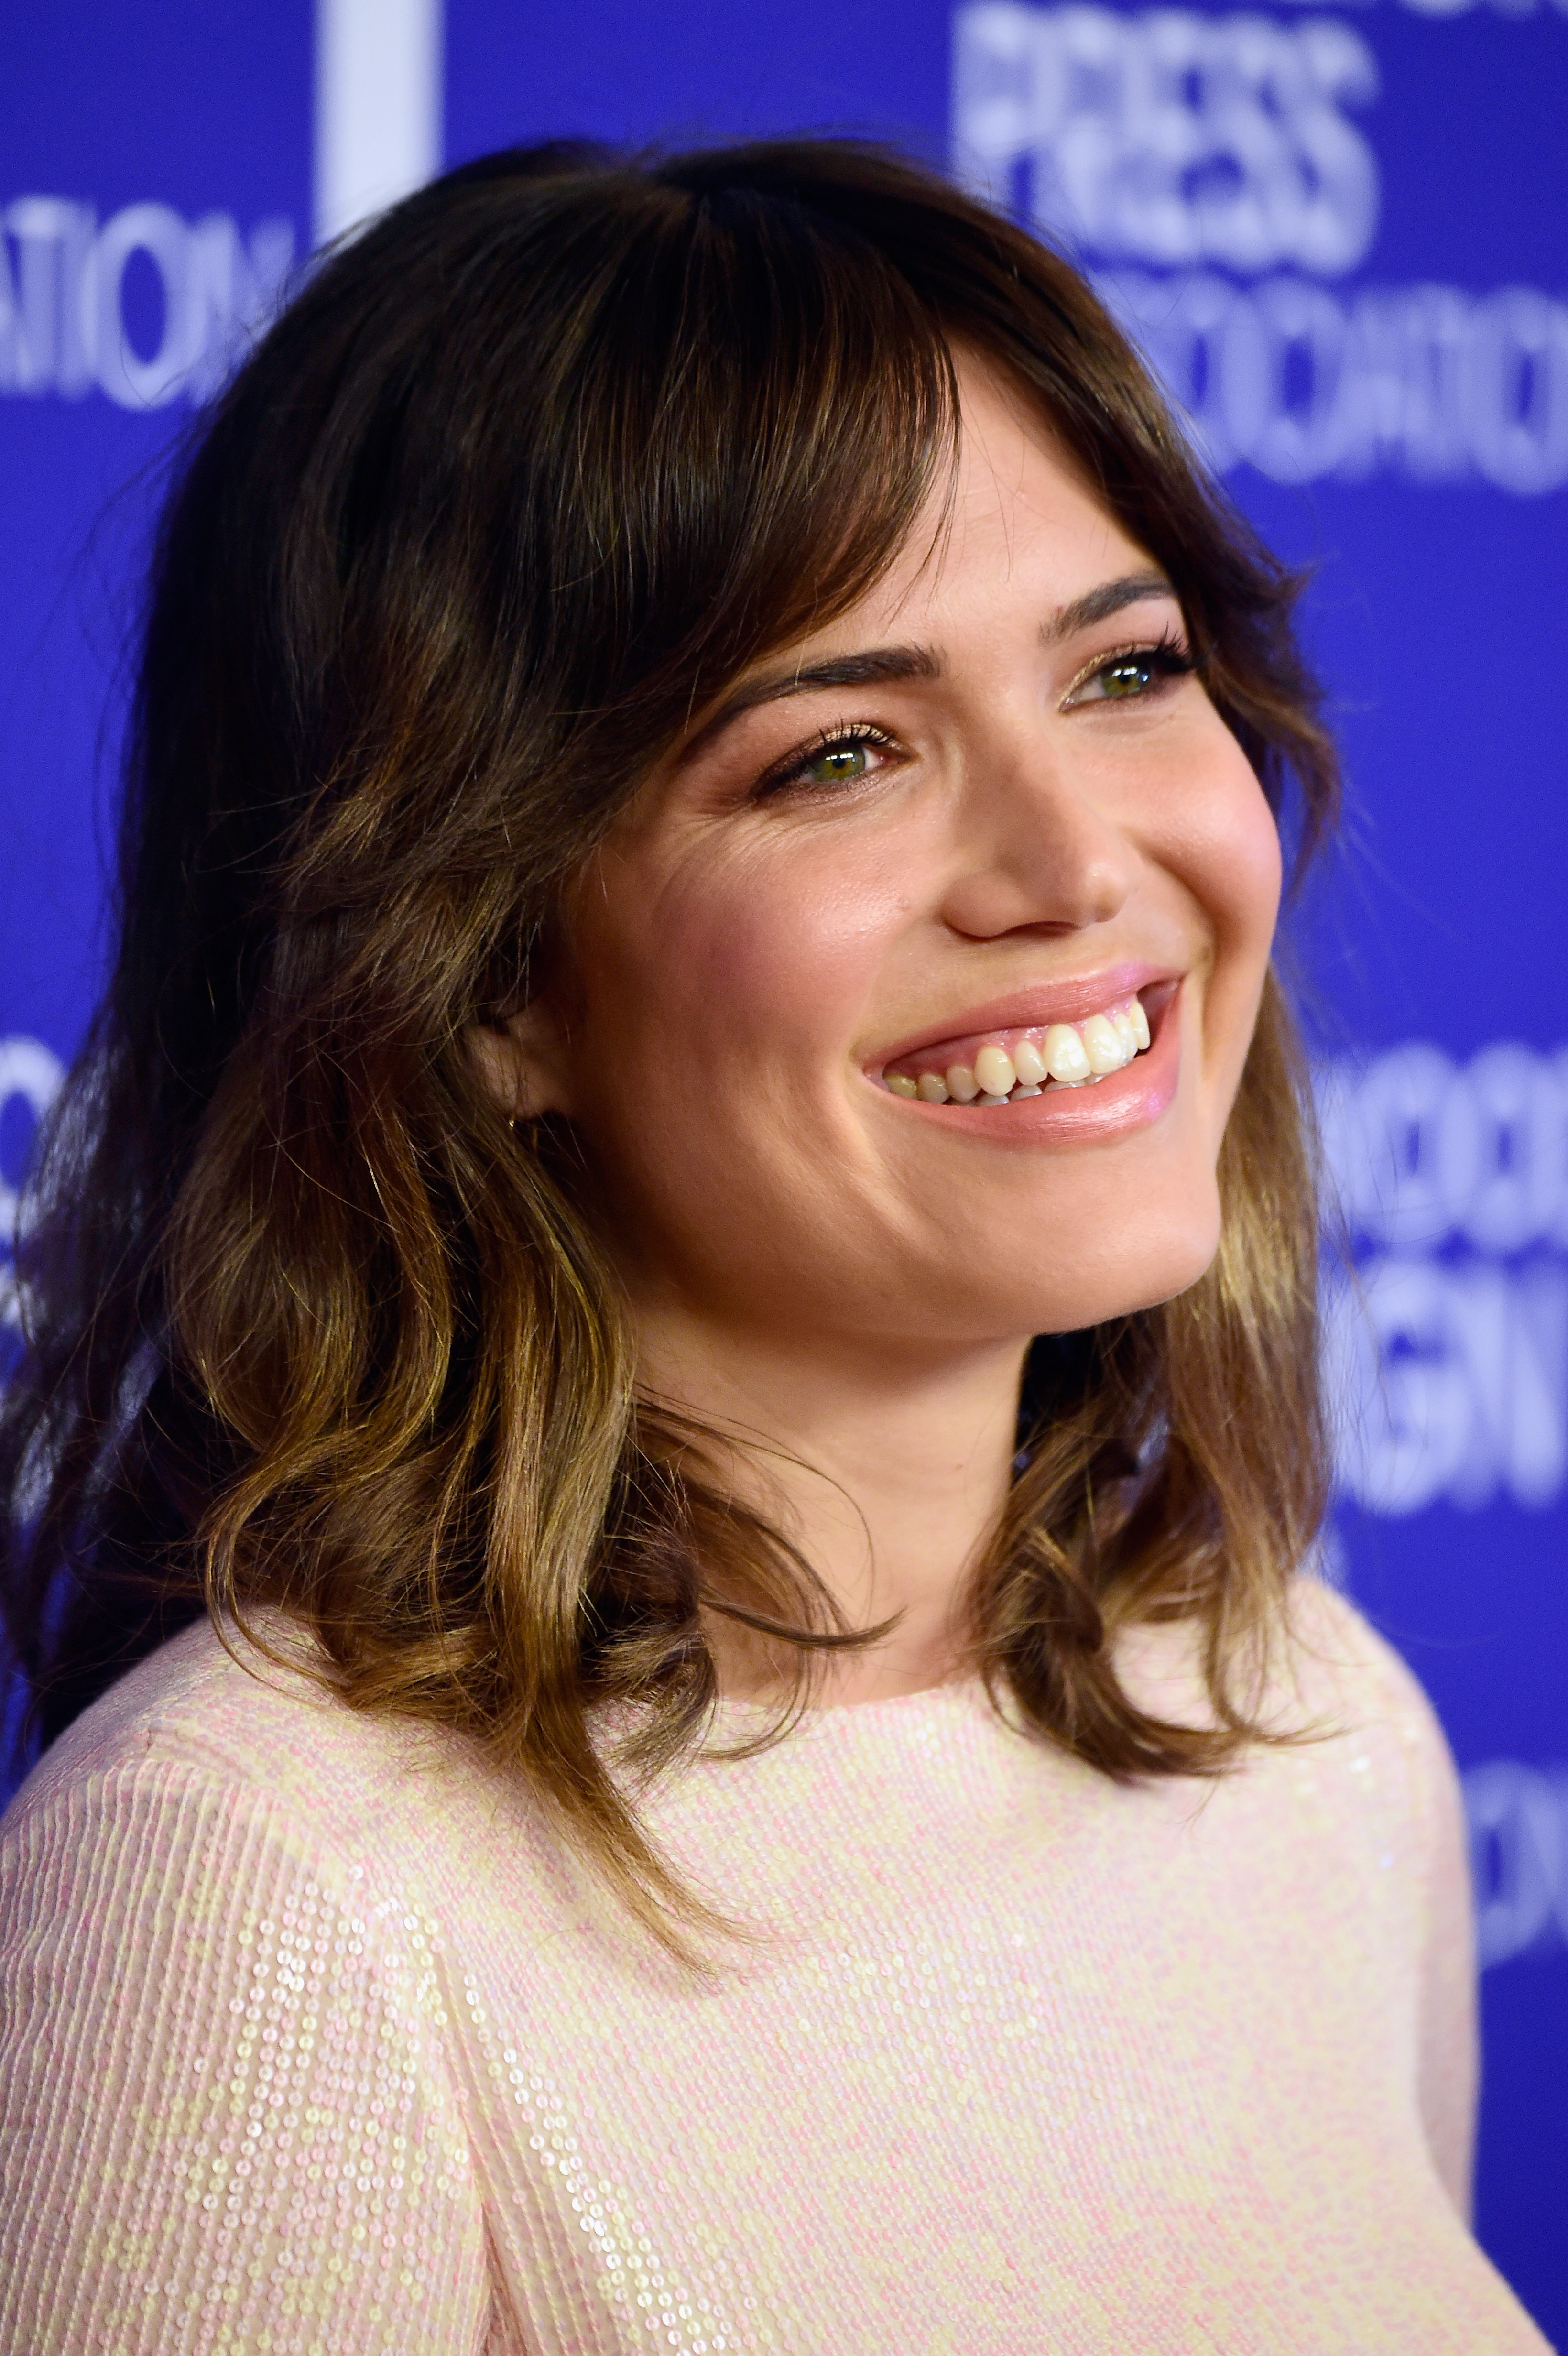 Mandy moore is dating who